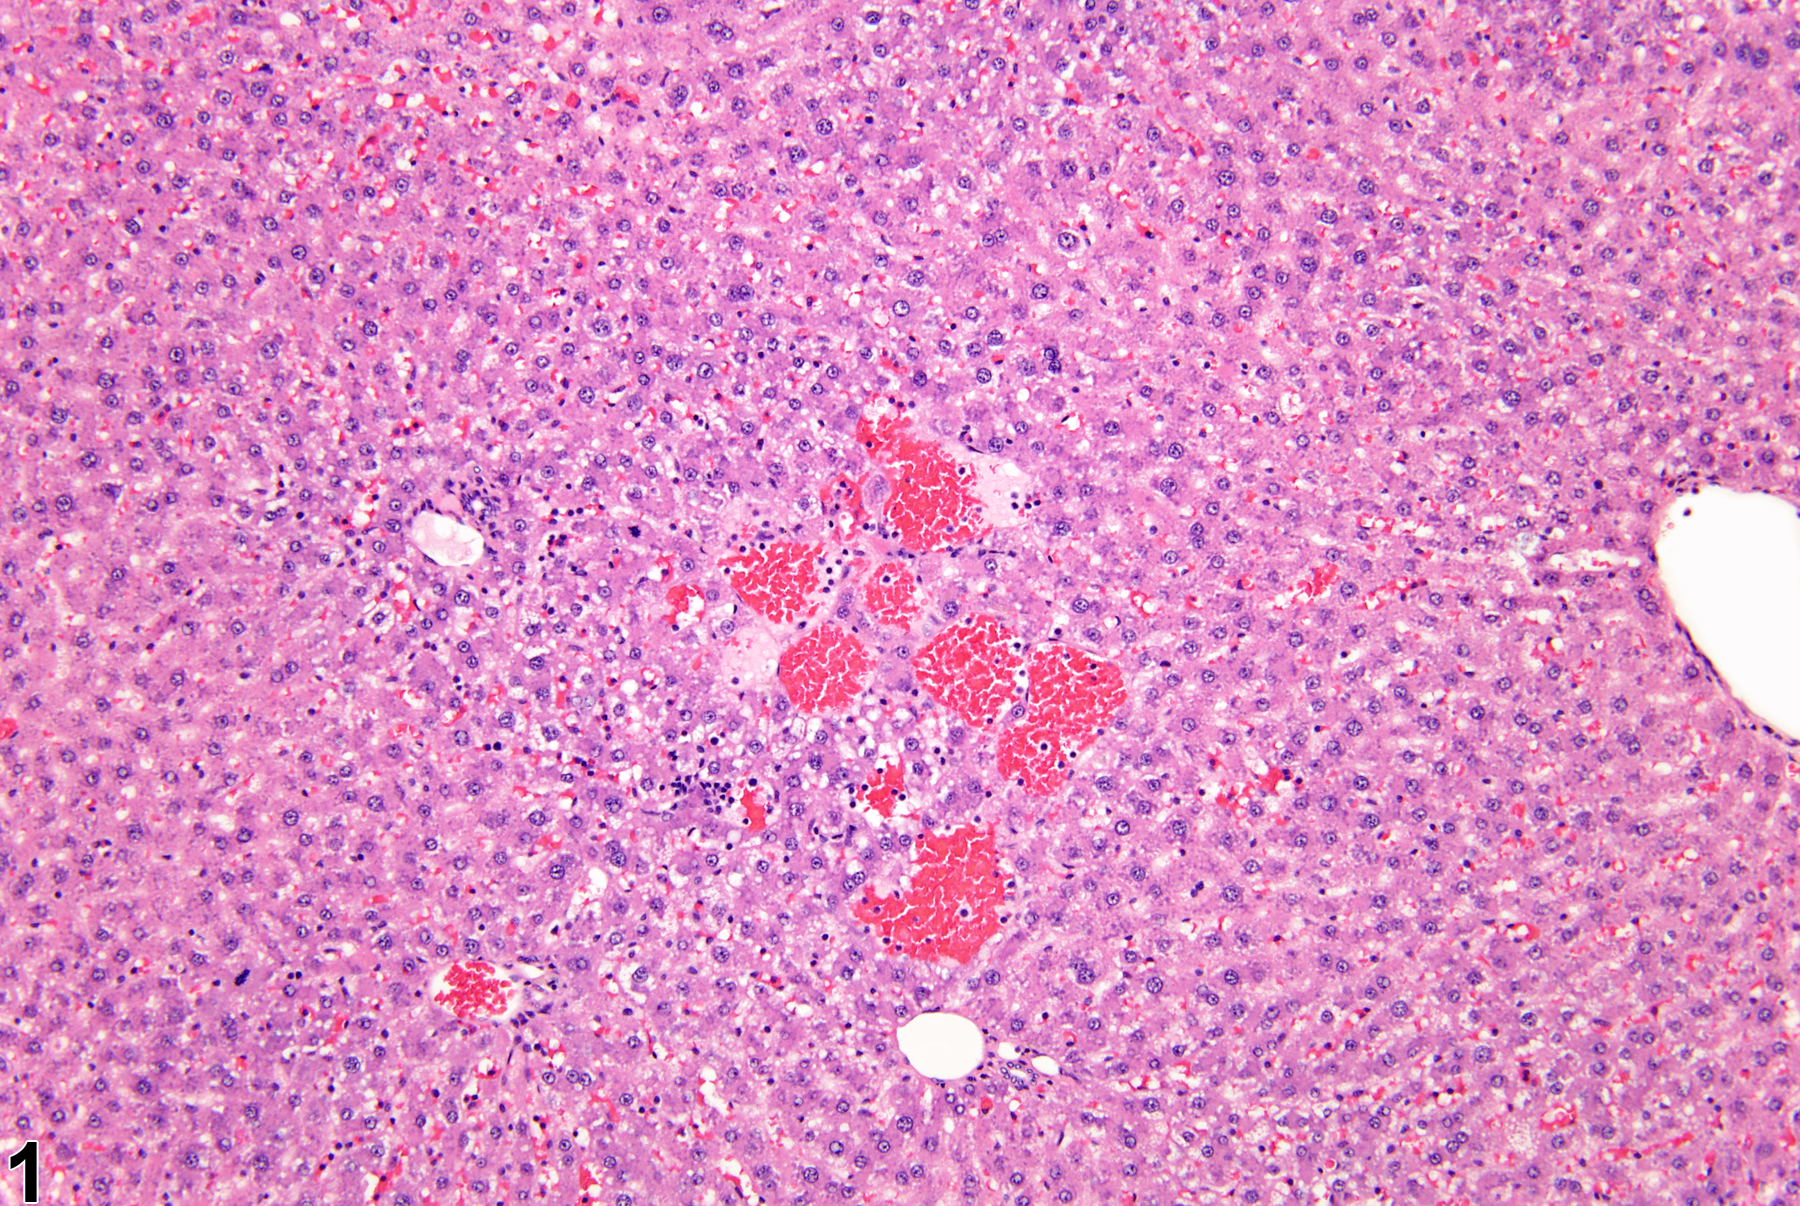 Image of angiectasis in the liver from a female F344/N rat in a chronic study